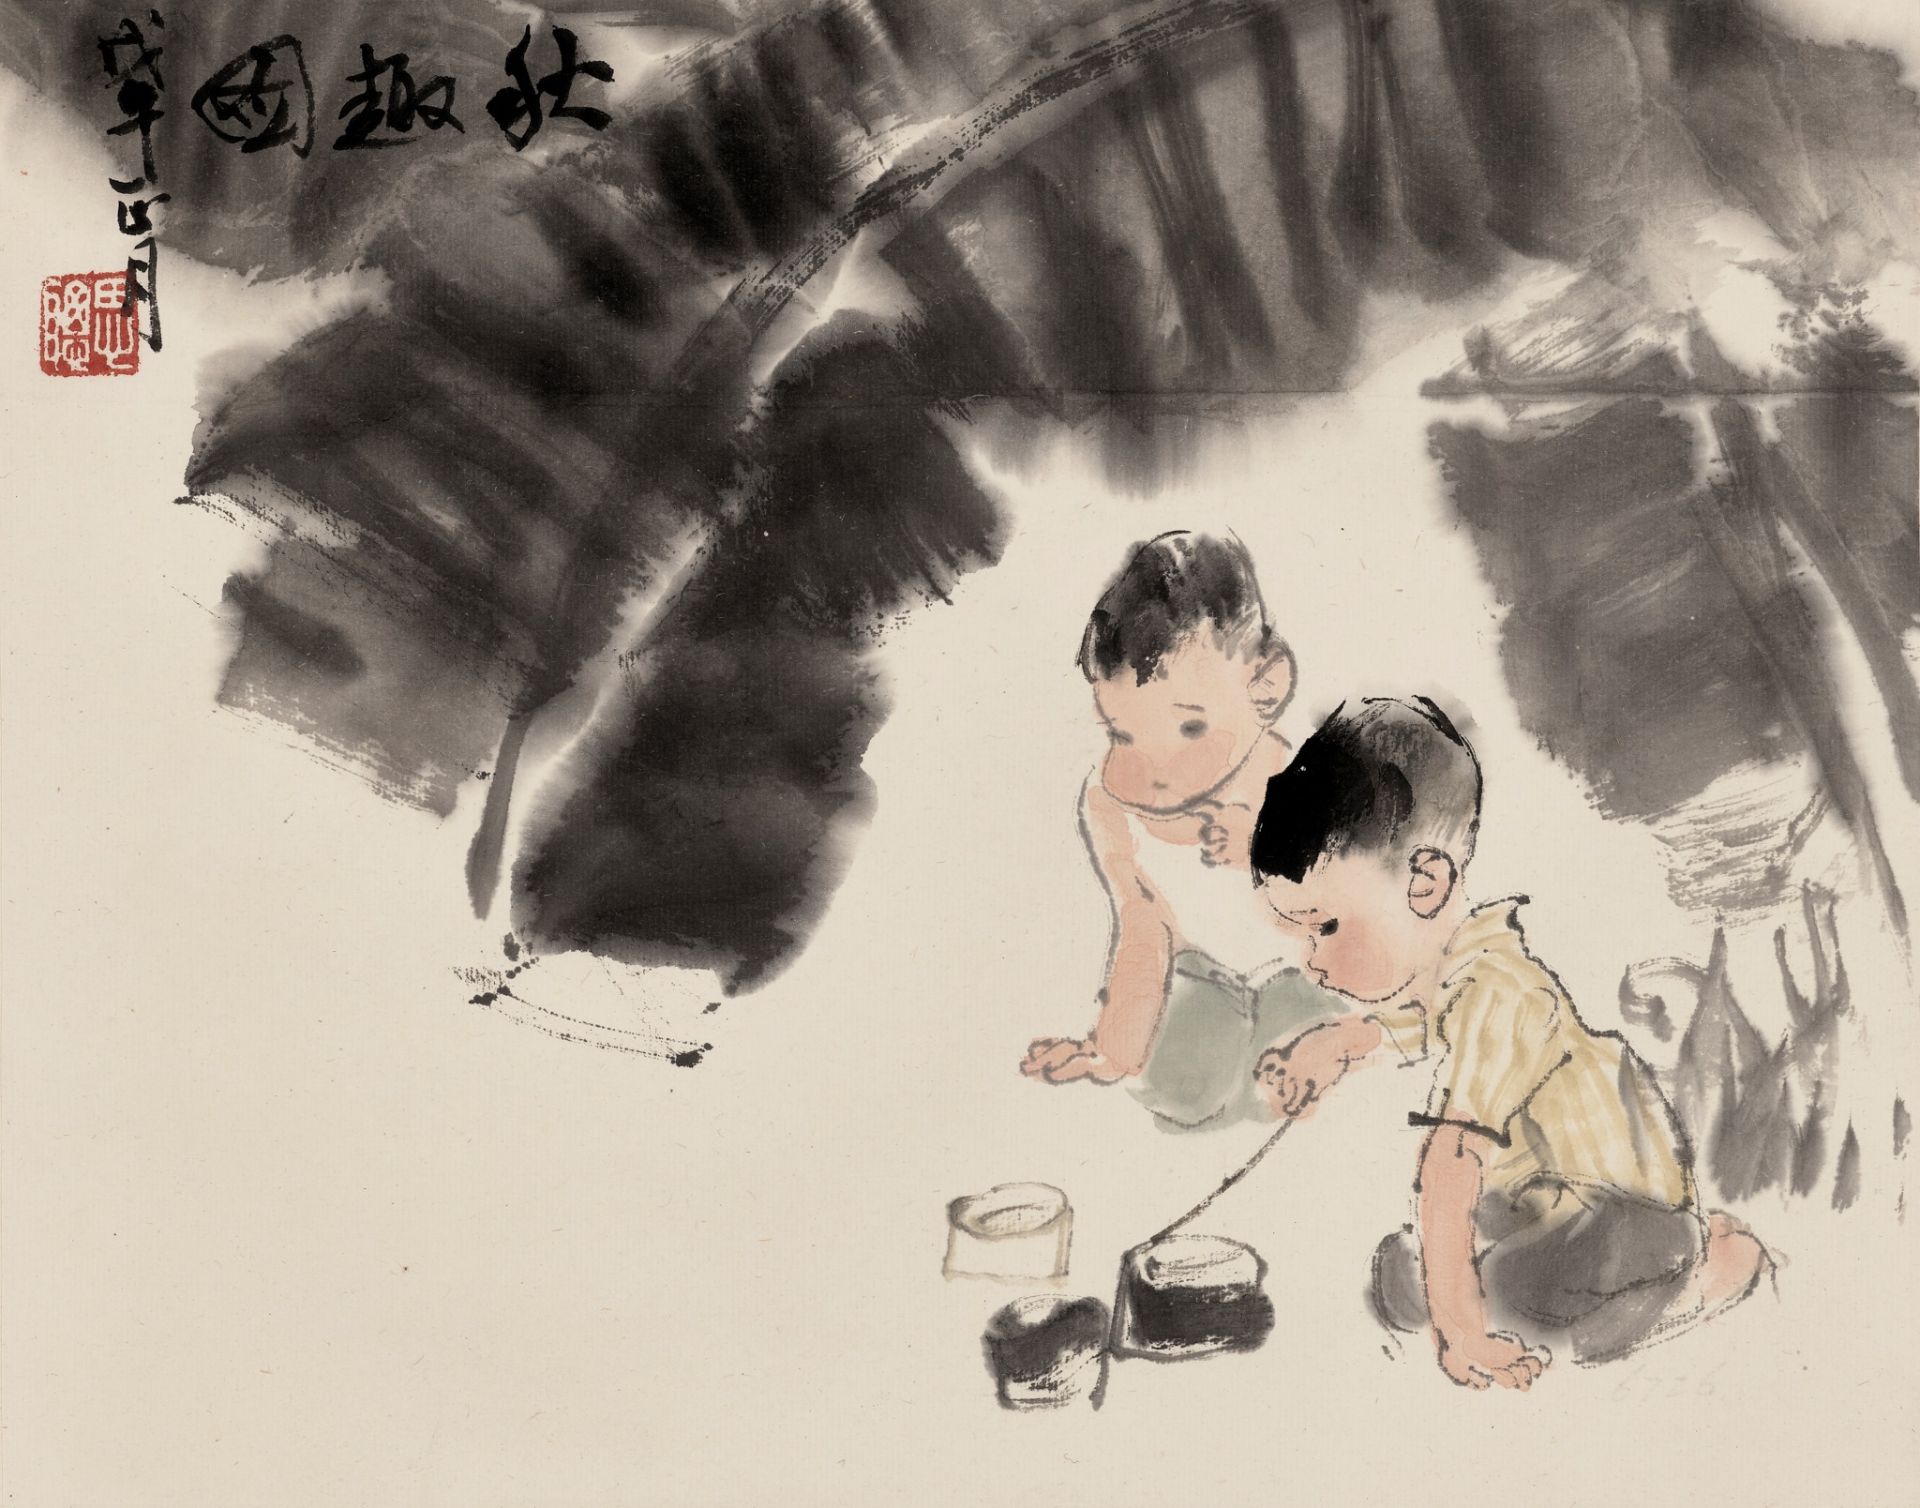 A PORTRAIT OF AUTUMN', BY ZHOU SICONG (1939-1996), DATED 1978